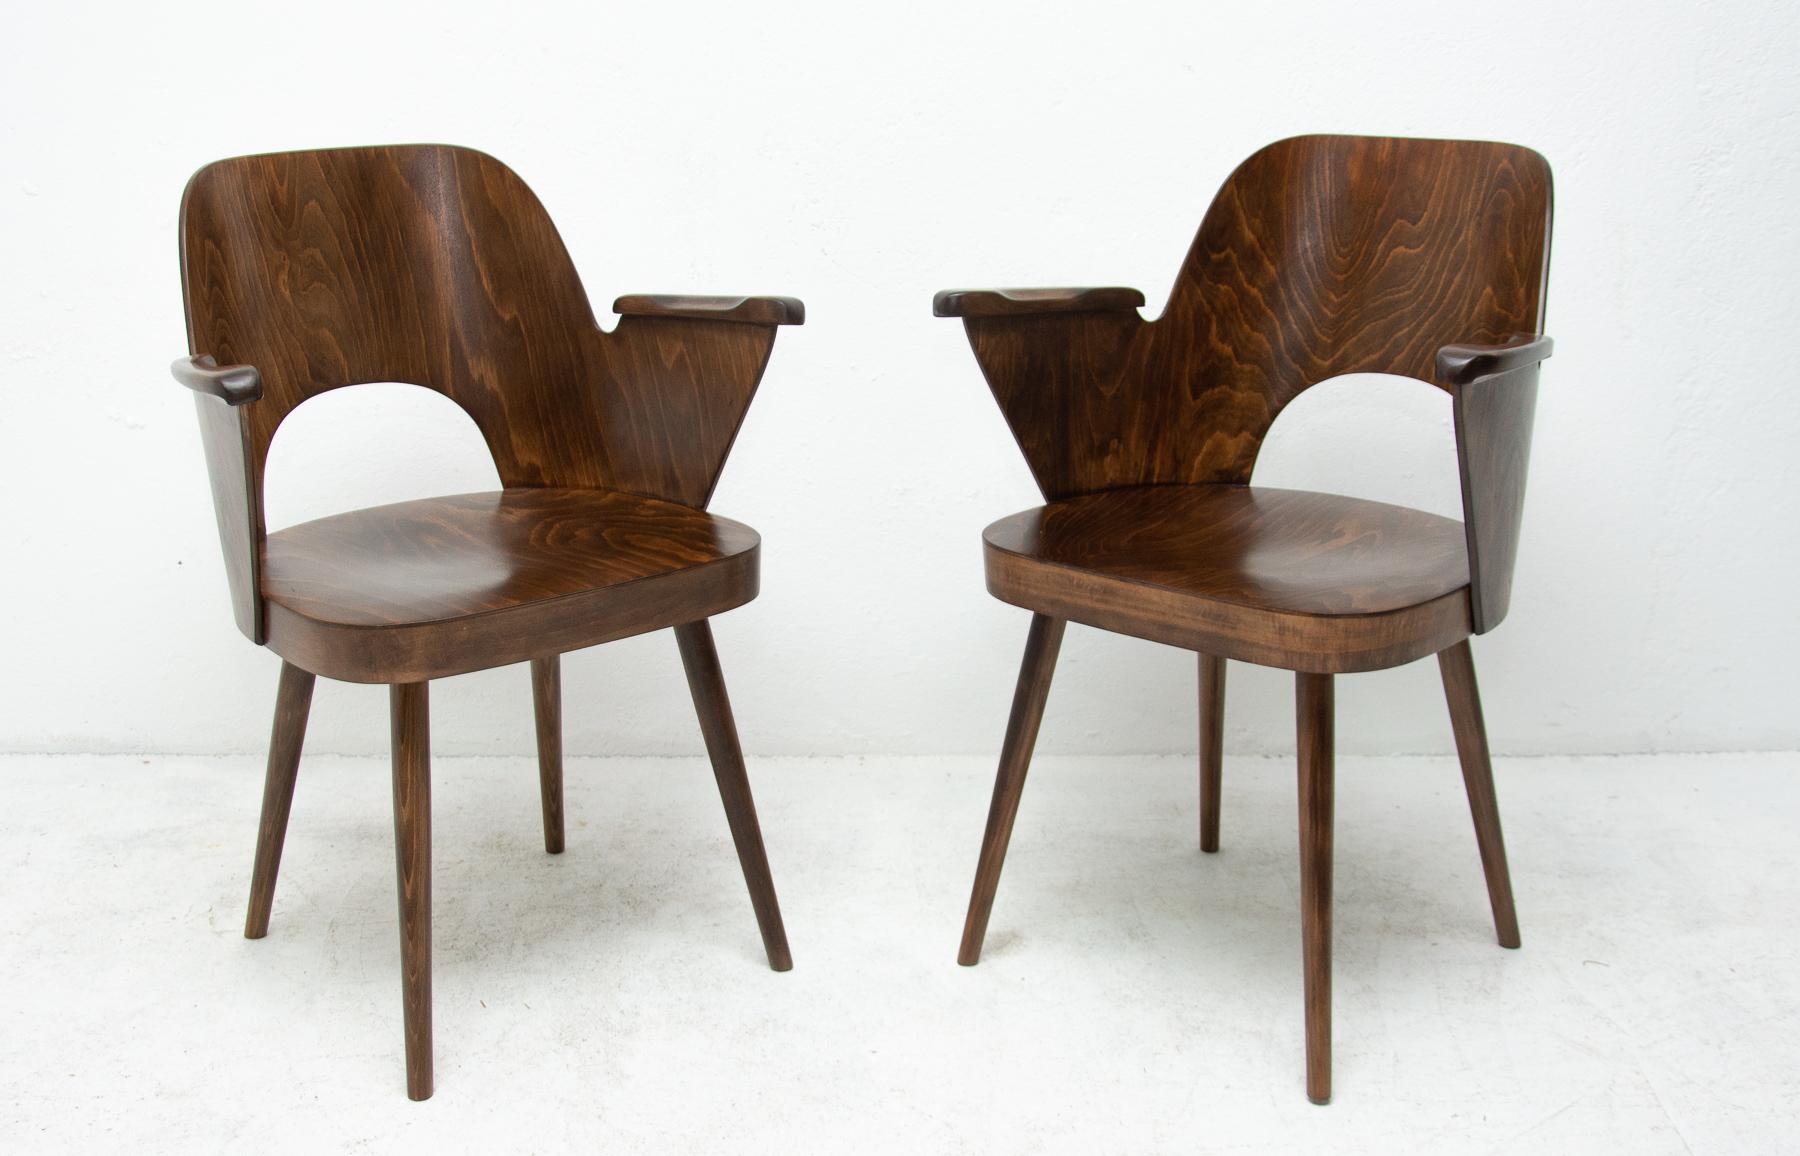 These armchairs were designed by Austrian architect Oswald Haerdtl. The chairs are made from dark stained bent beech wood. They were made in the former Czechoslovakia for TON Bystrice pod Hostýnem in the 1960s. The chairs are in excellent condition,